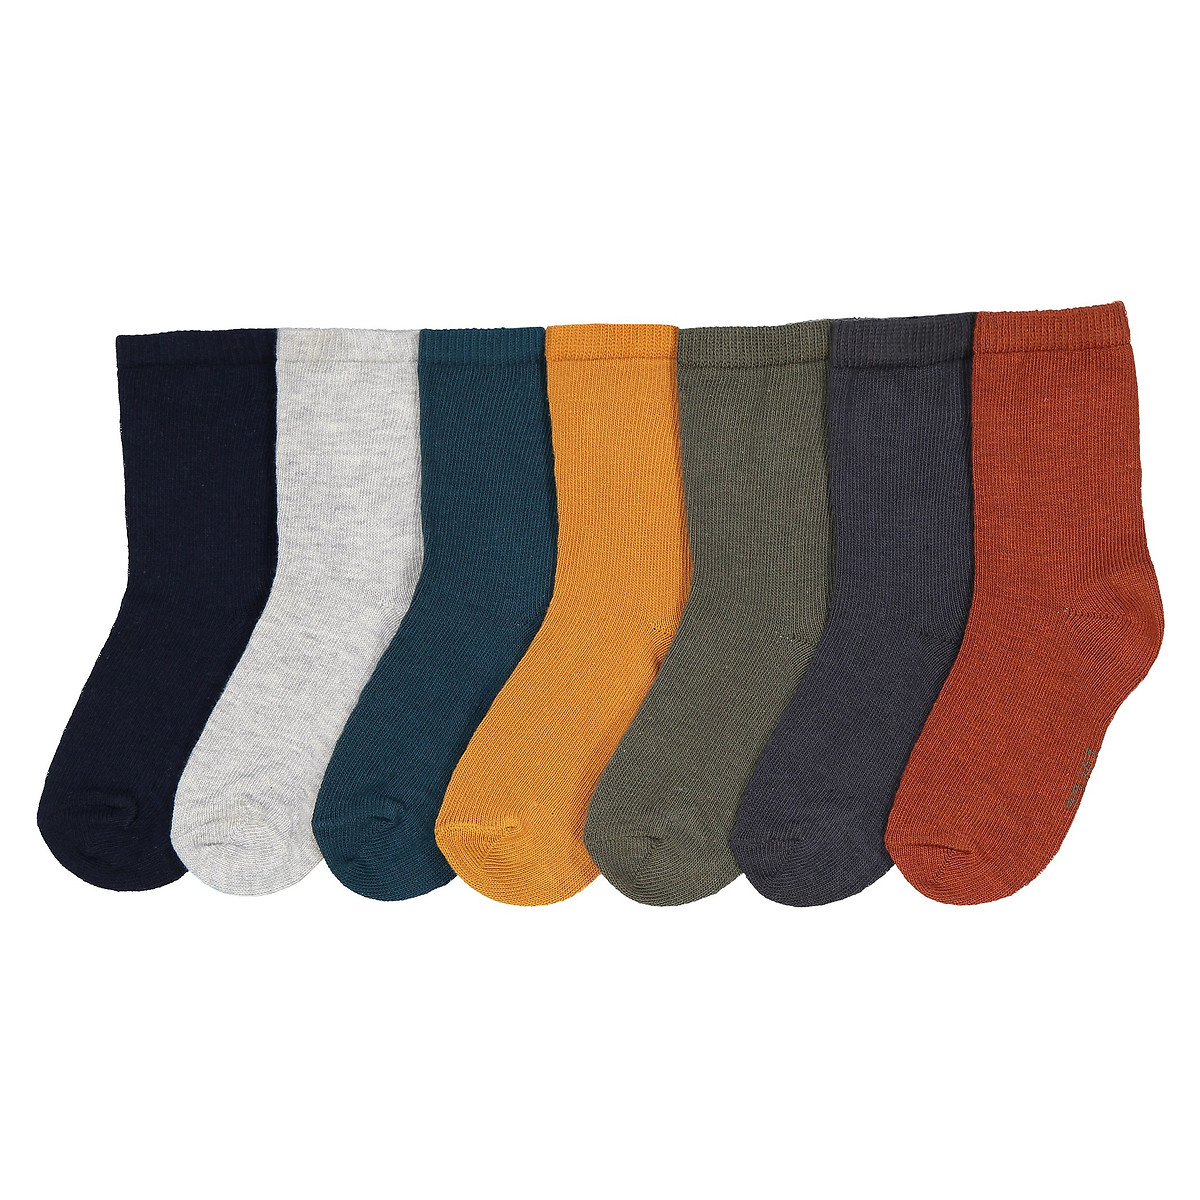 Pack of 7 Pairs of Plain Socks in Cotton Mix